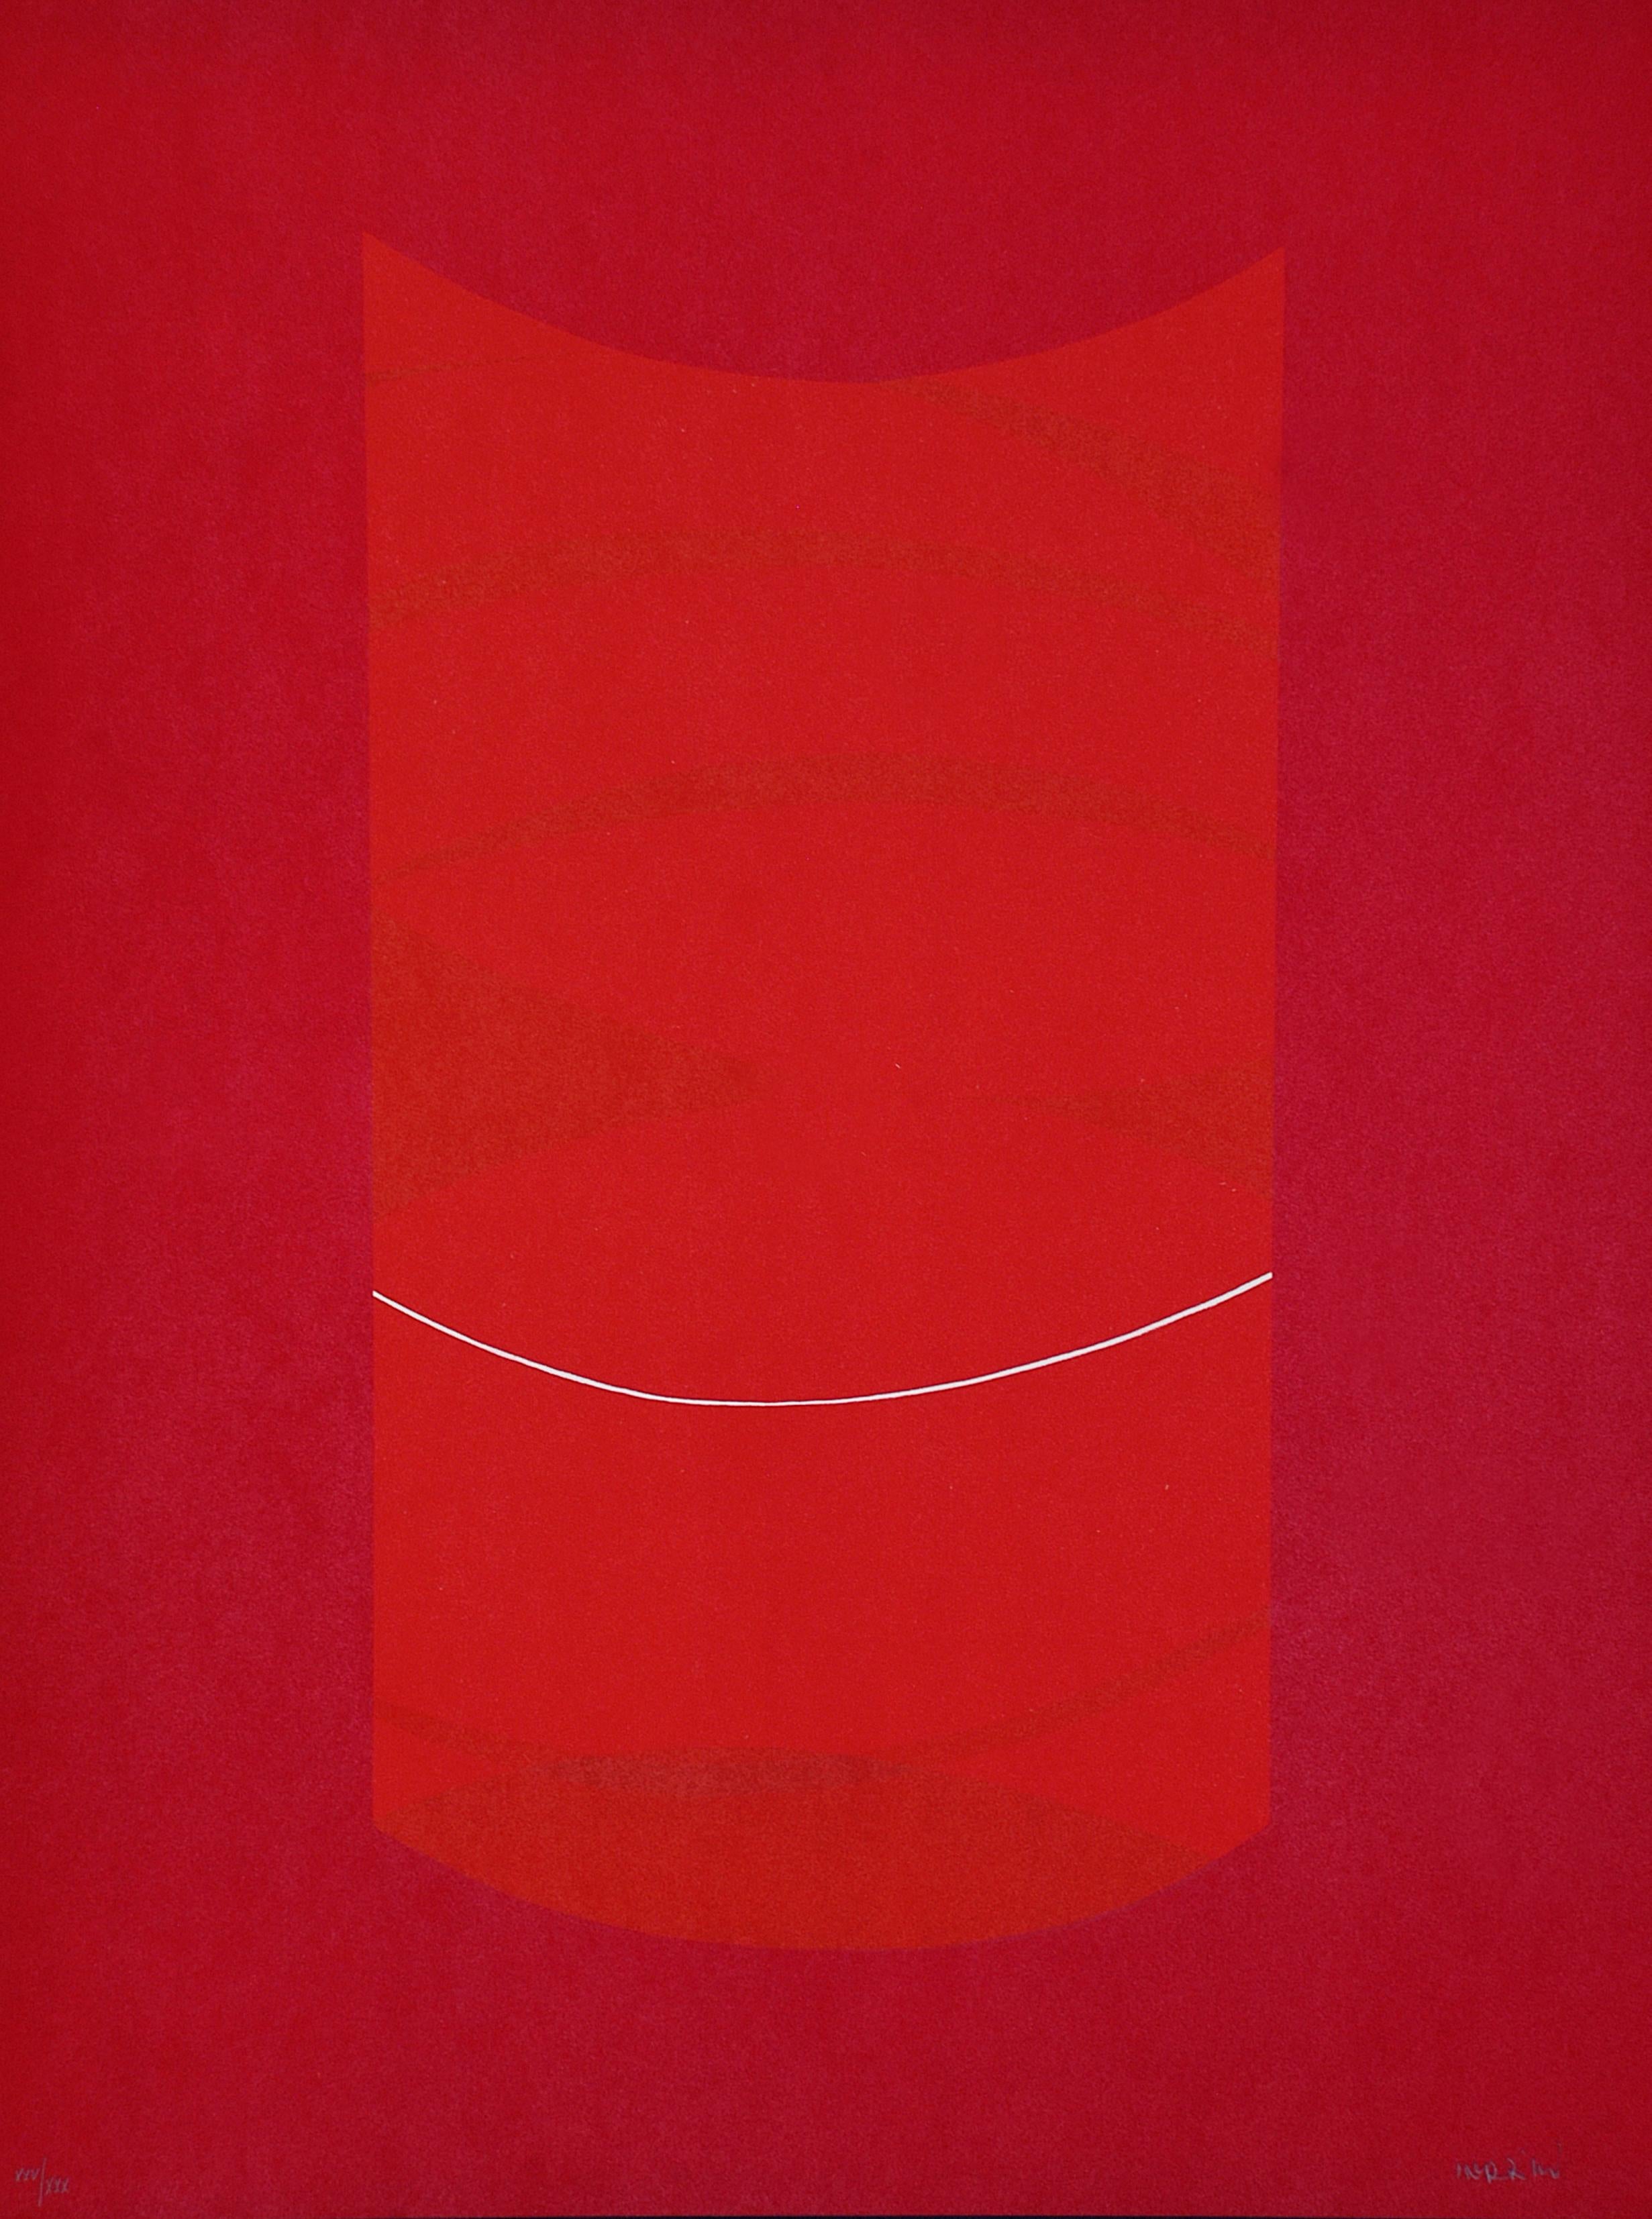 Warm red lithograph Red One realized by Lorenzo Indrimi in the 1970s.

This is an edition of 100 prints, plus a few artist's proofs and 30 pieces in Roman numbers.